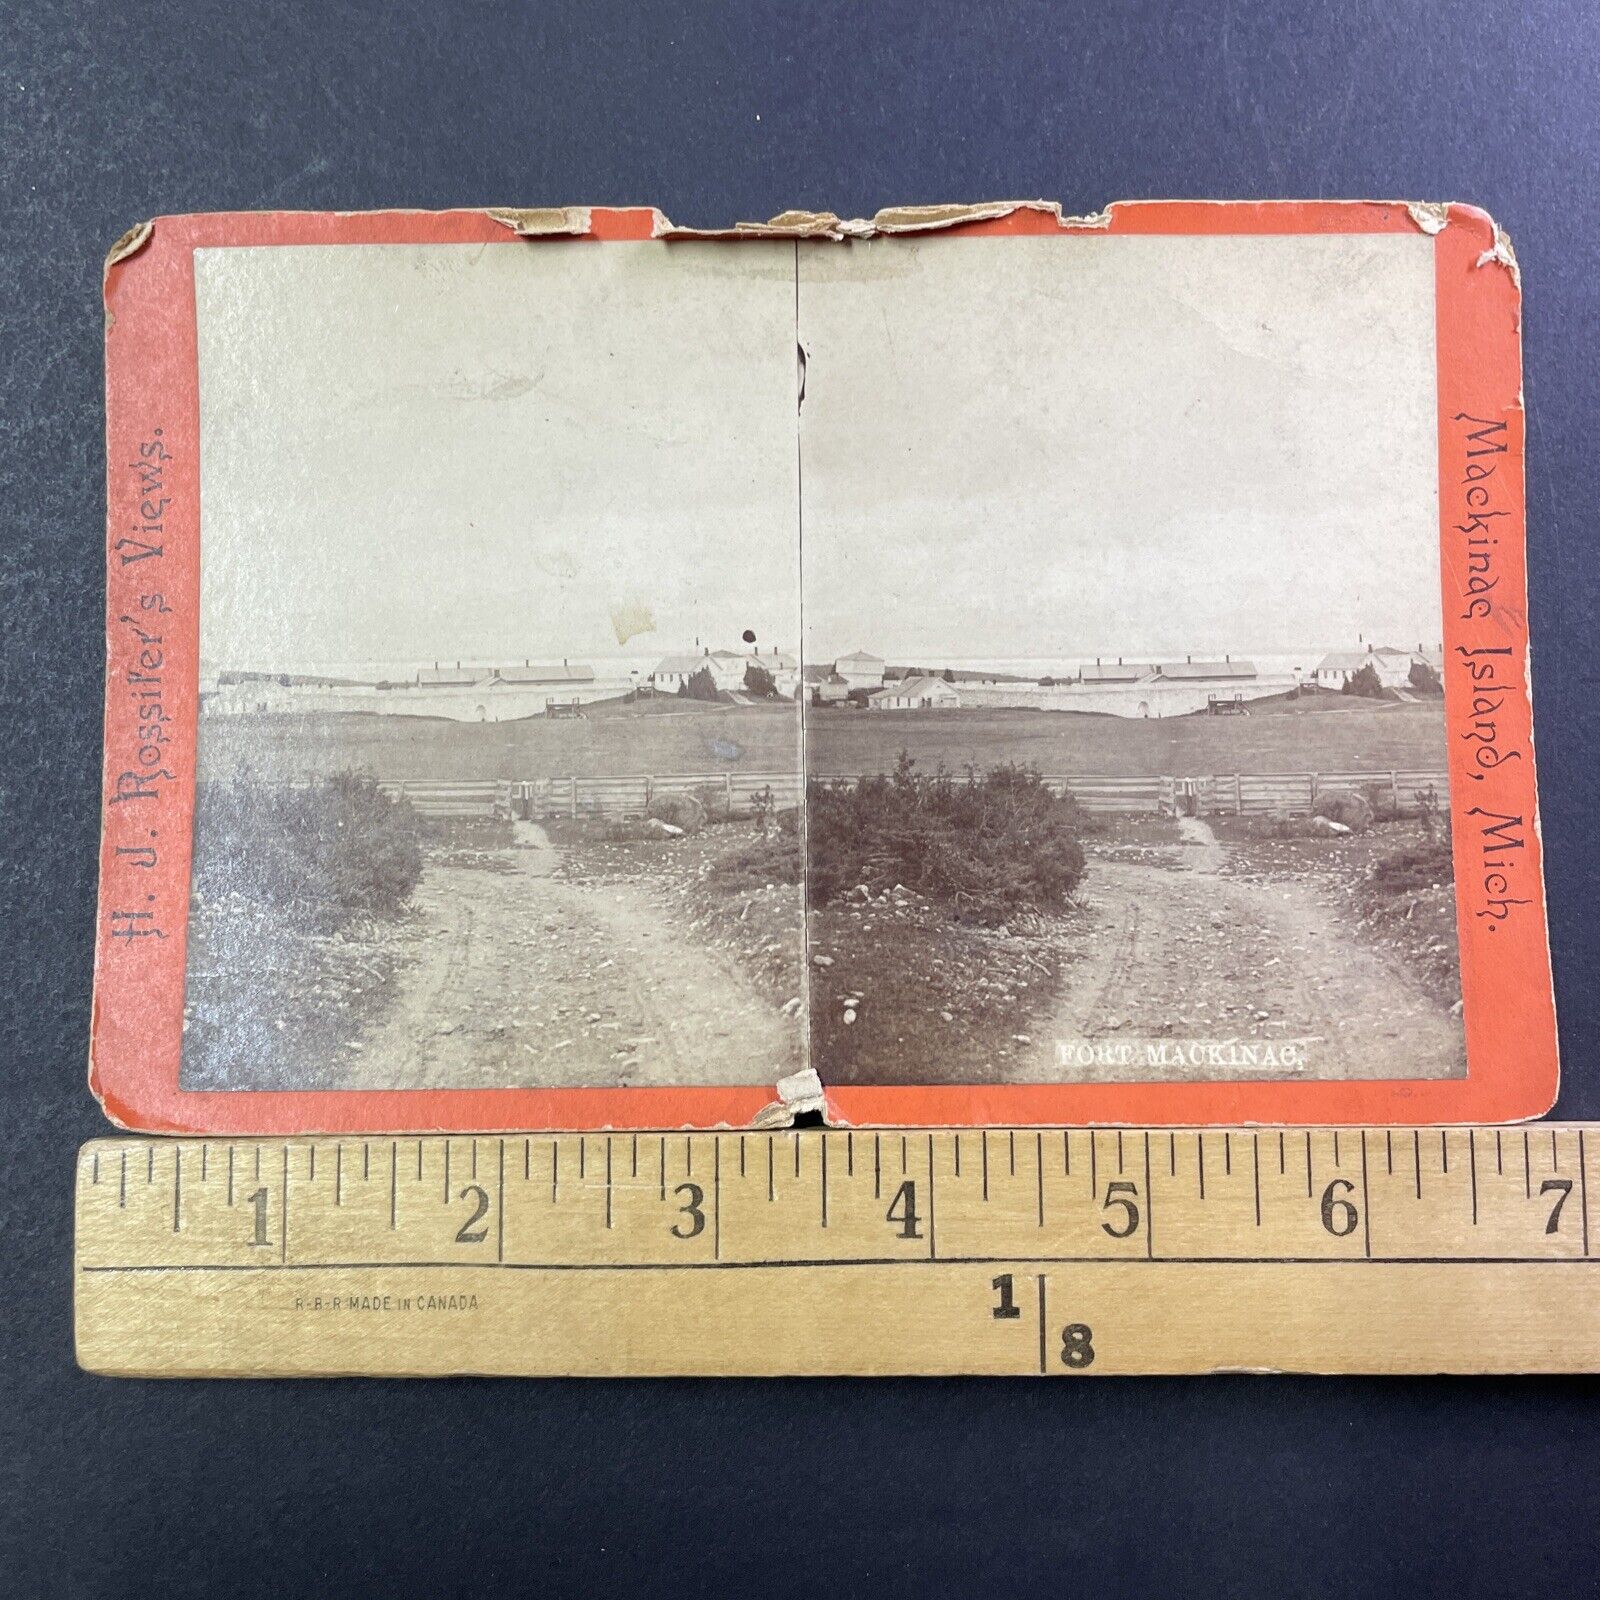 Fort Mackinac Michigan Stereoview HJ Rossiter Photo Card Antique c1875 X1243